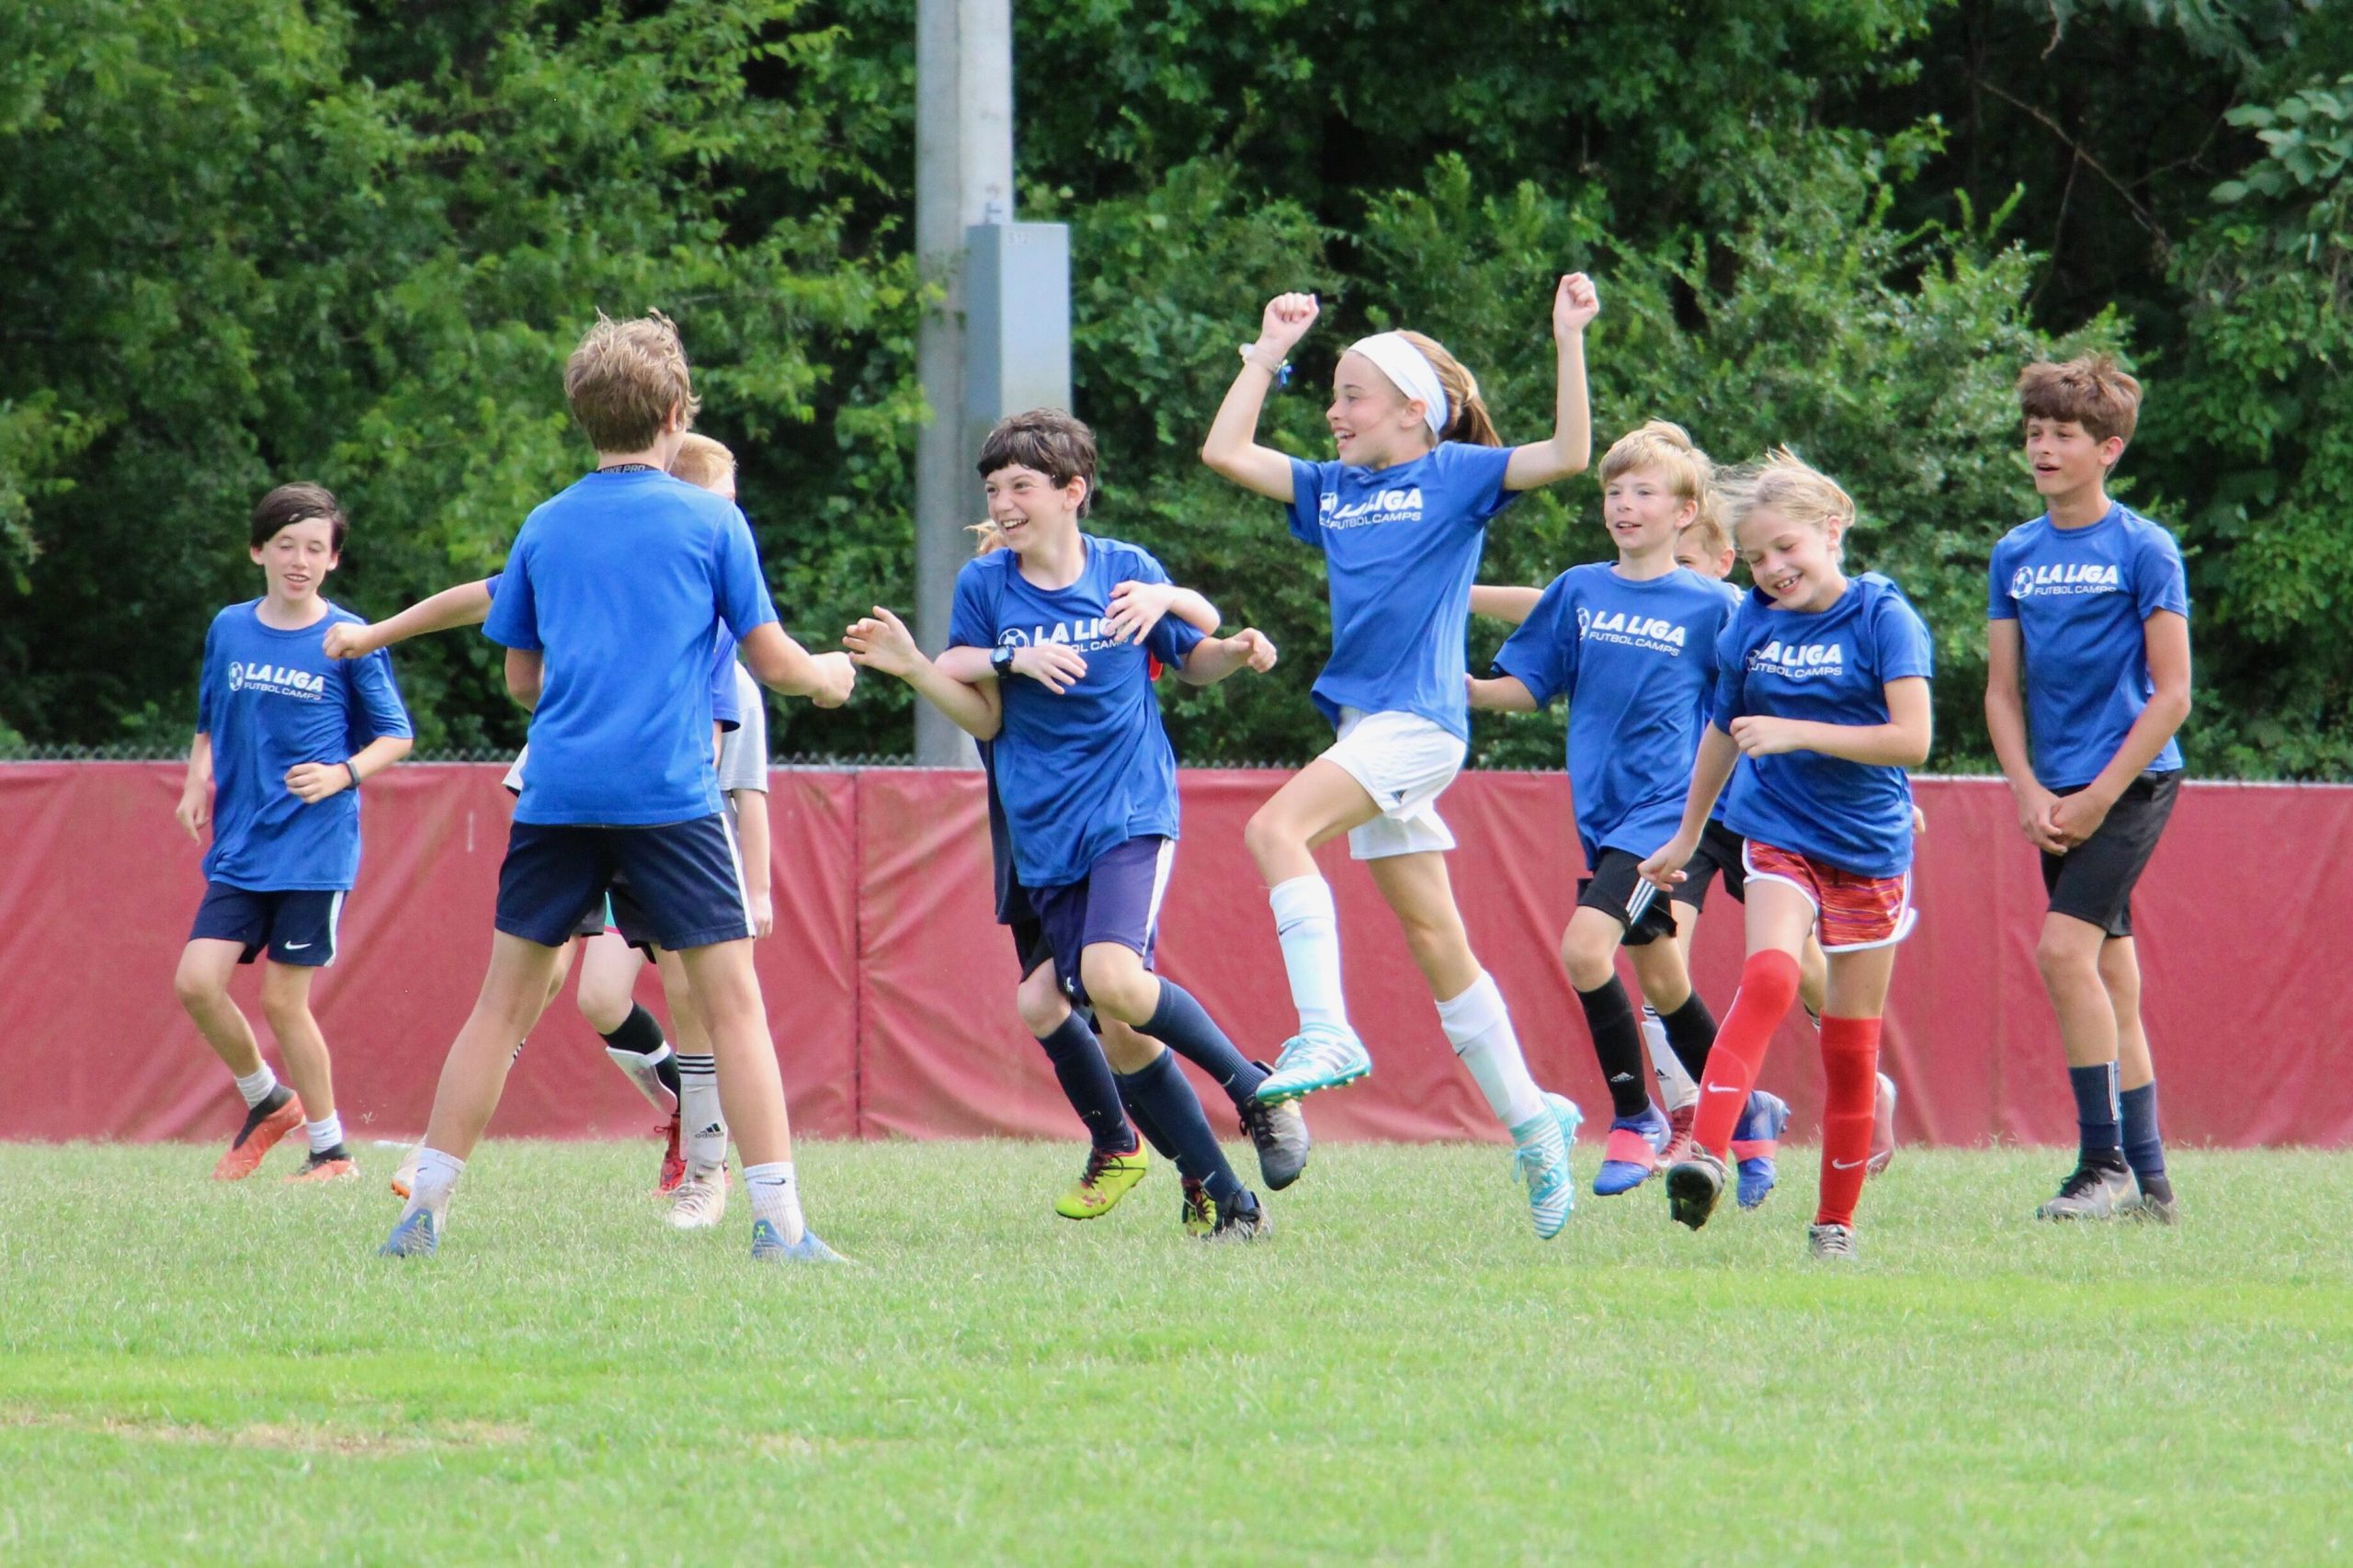 'La Liga' to offer two sets of day camps in Trussville